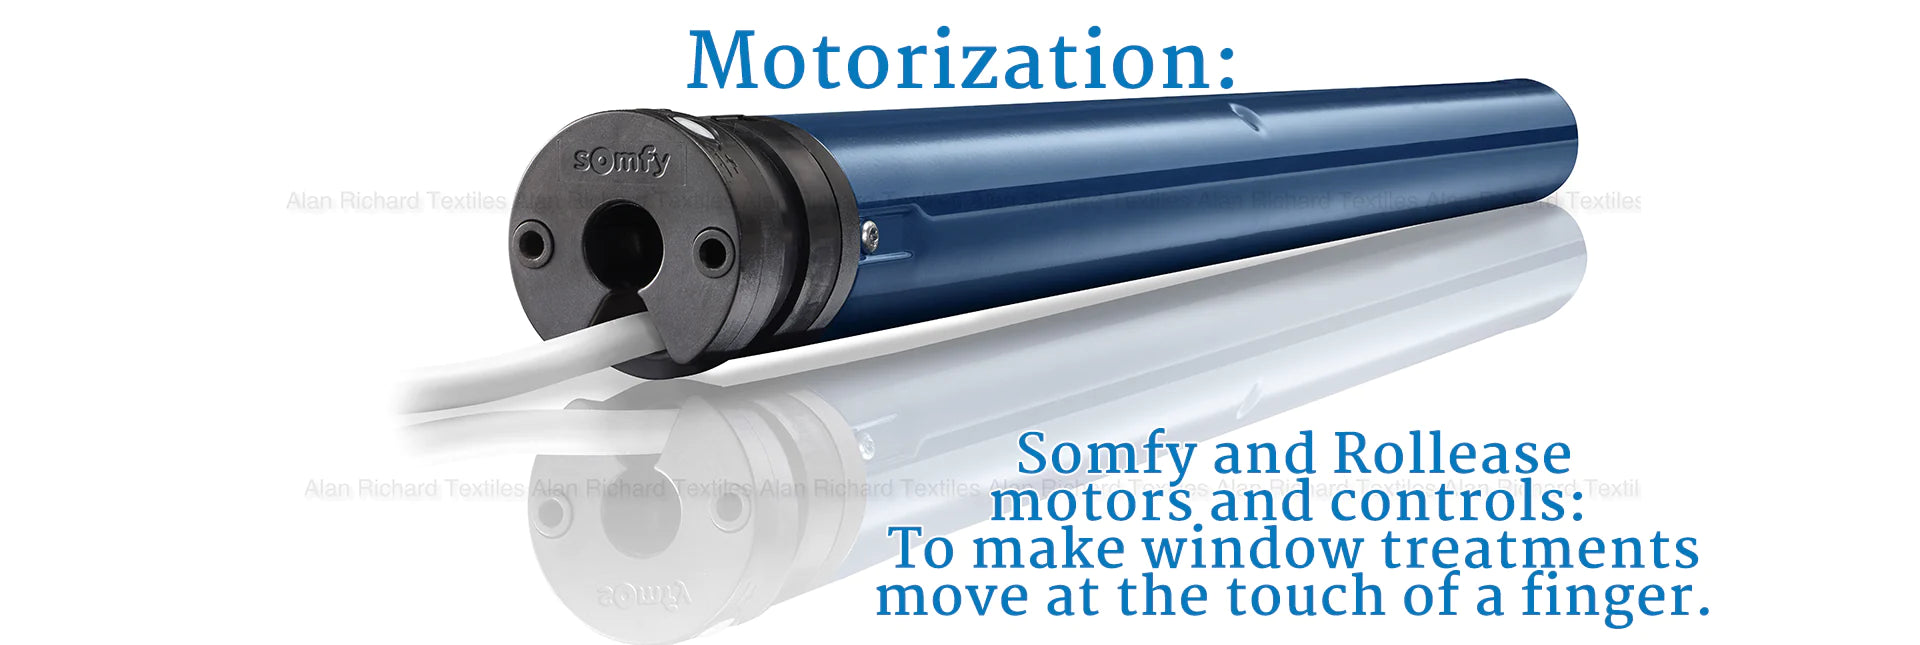 Motorized Blinds and Shades - Somfy Rollease